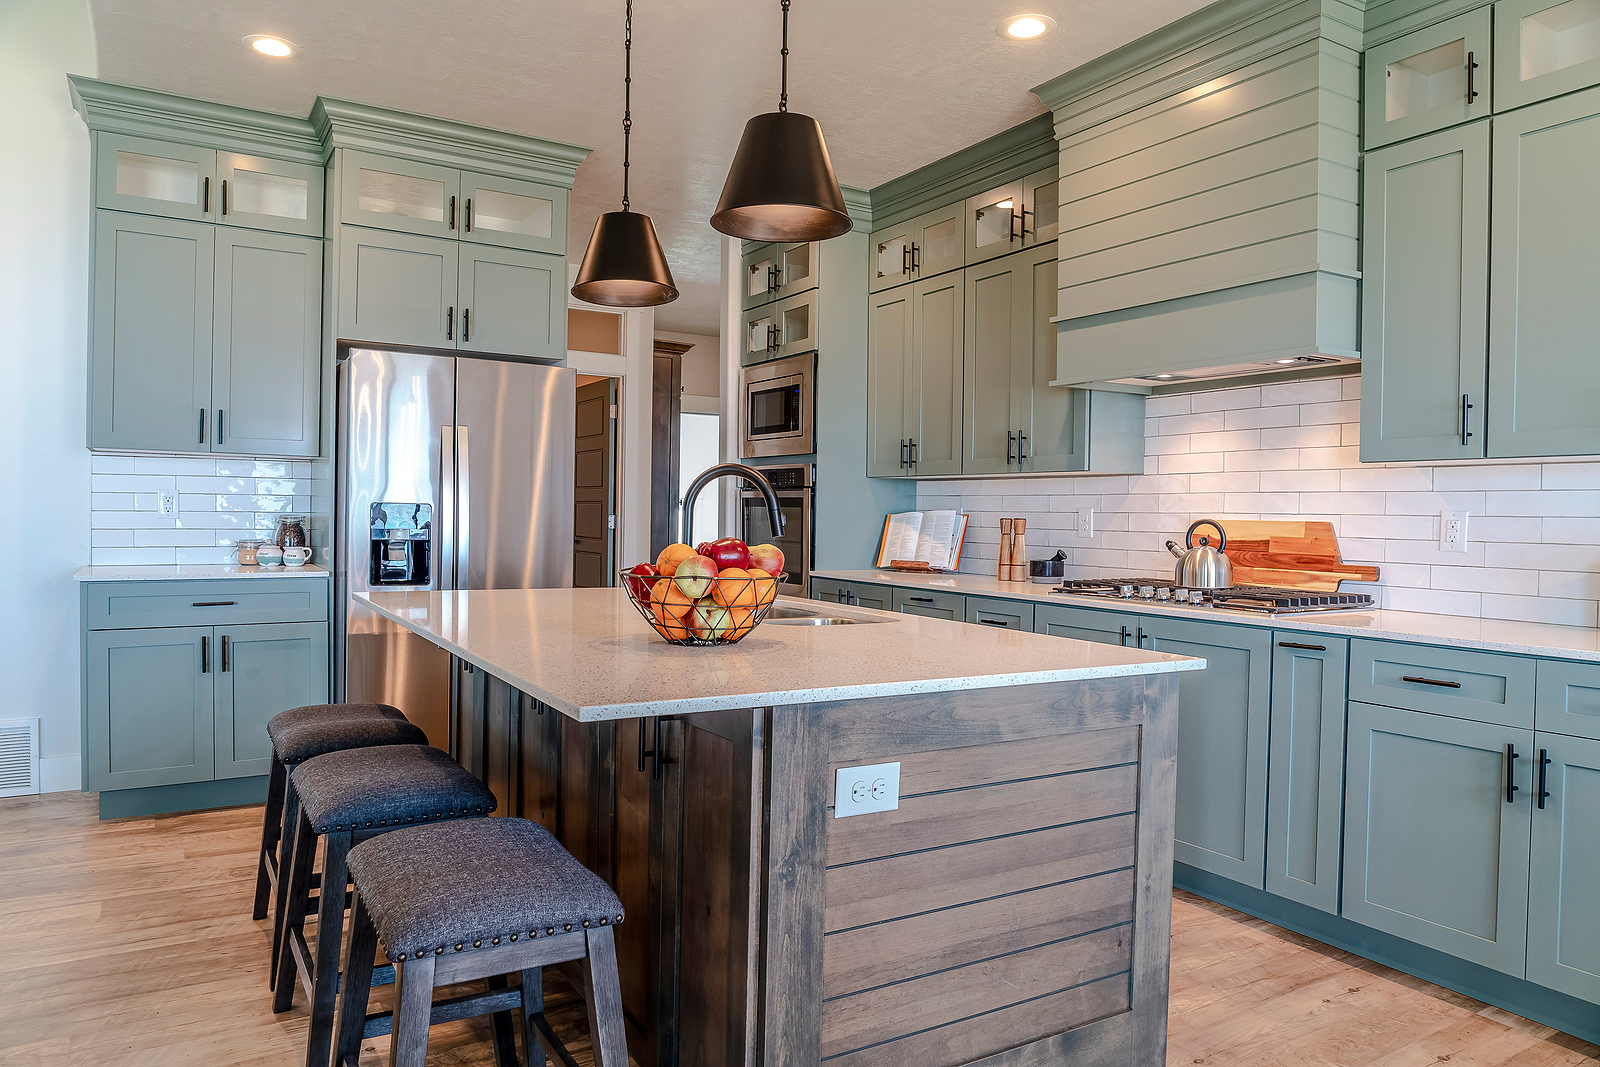 What Is The Most Popular Cabinet Color For Kitchens?